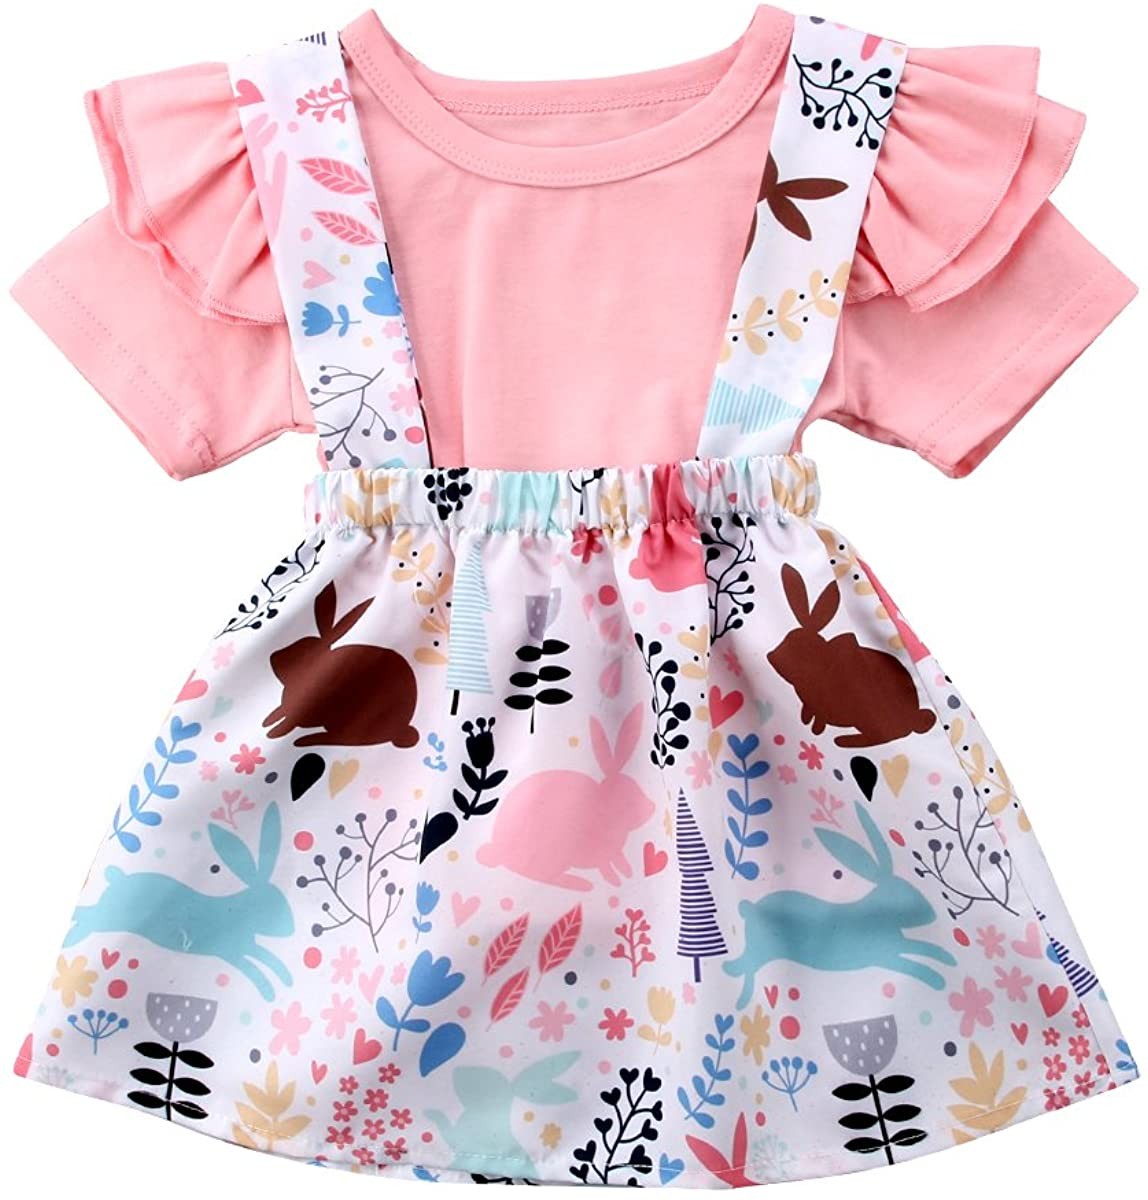 Easter Day-Toddler Baby Girls Clothes Set Ruffle Short Sleeve T-Shirt Tops+ Floral Overall Skirt